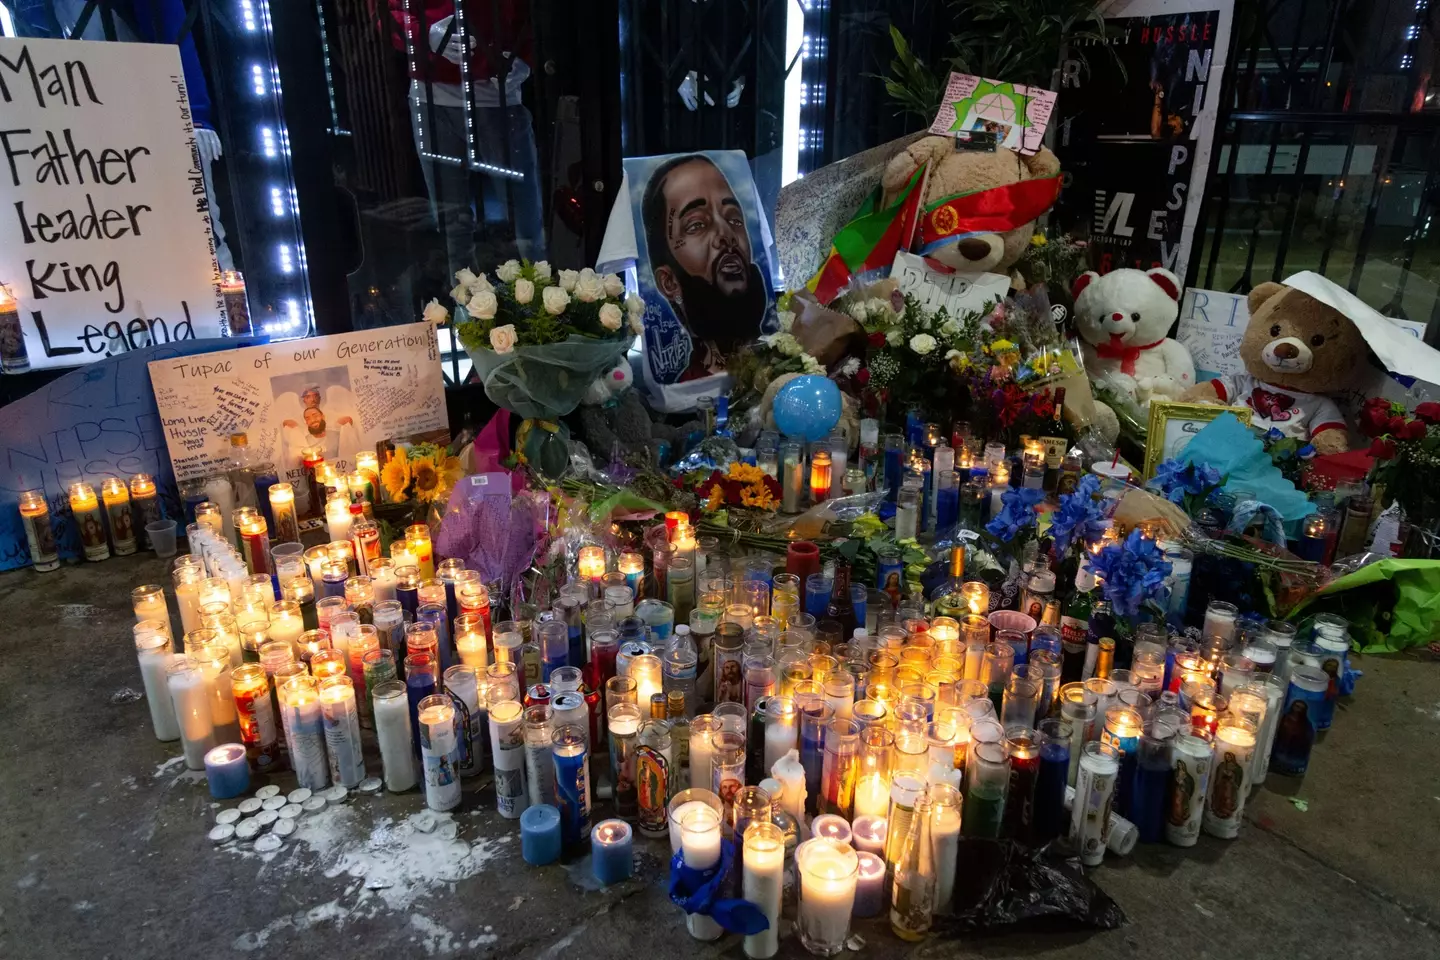 Hussle was shot dead outside his clothing store in Los Angeles.